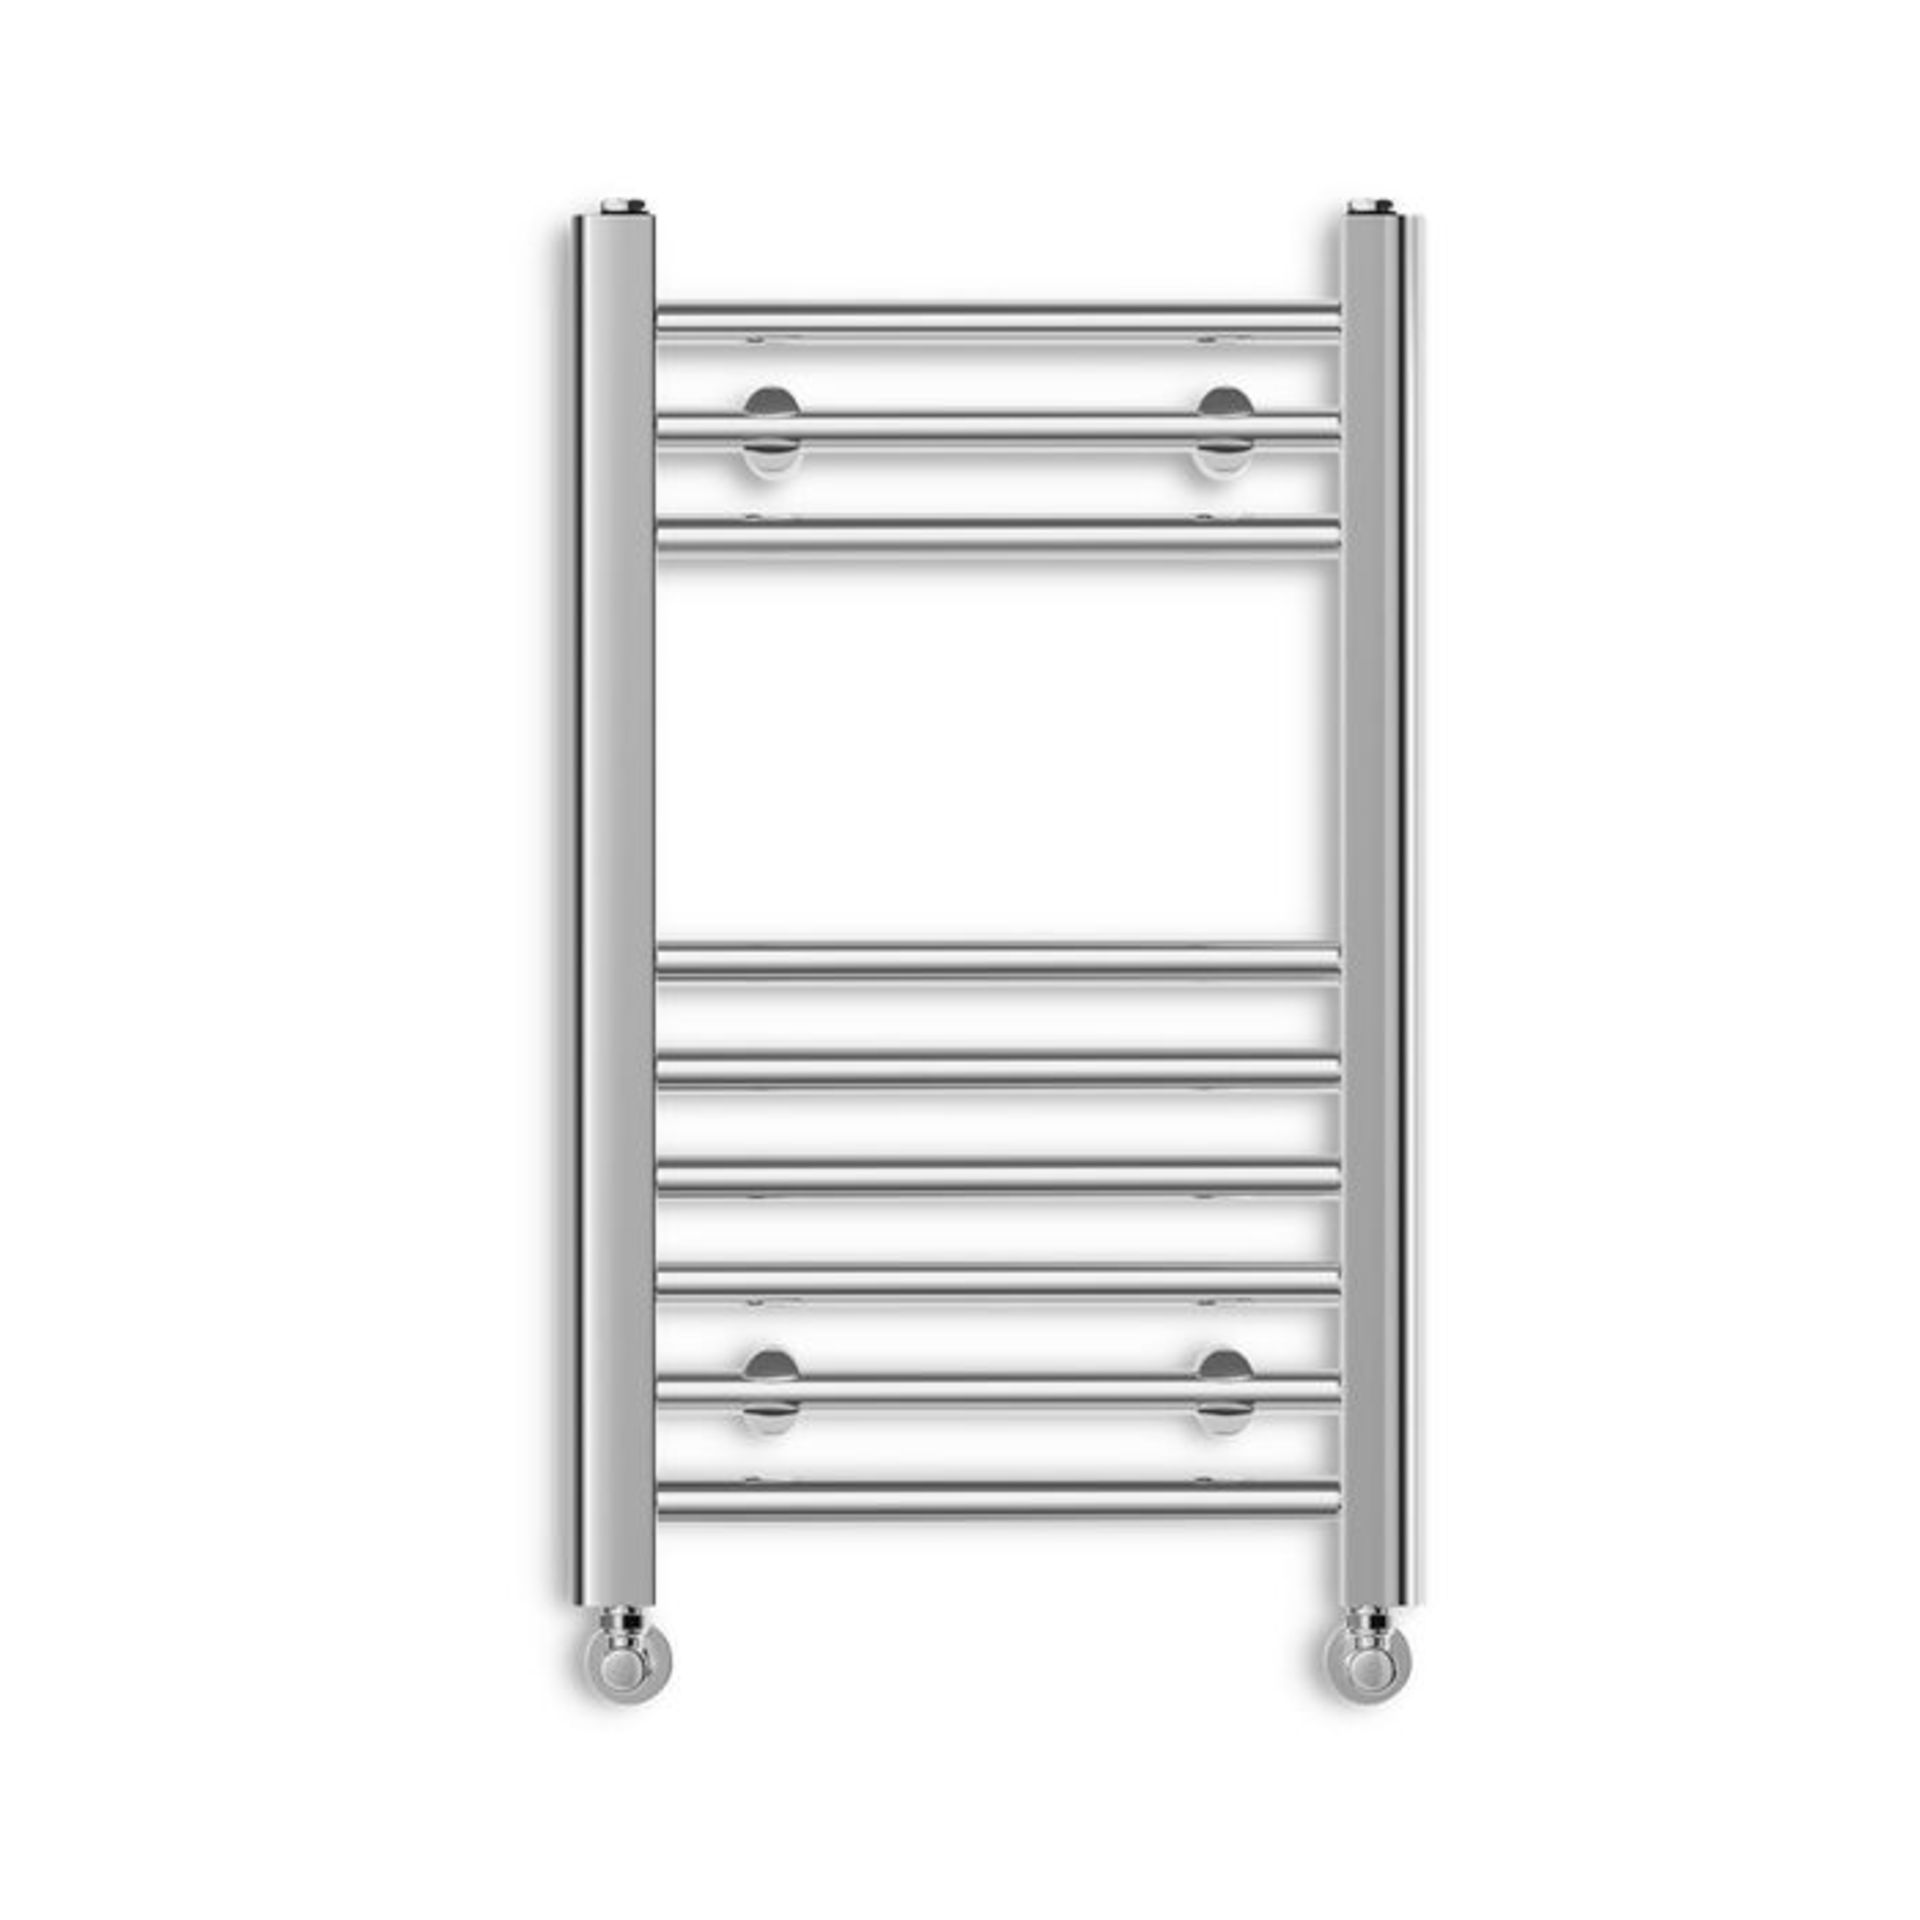 (KR201) 650x400mm Straight Heated Towel Radiator. Low carbon steel chrome plated radiator This - Image 2 of 3